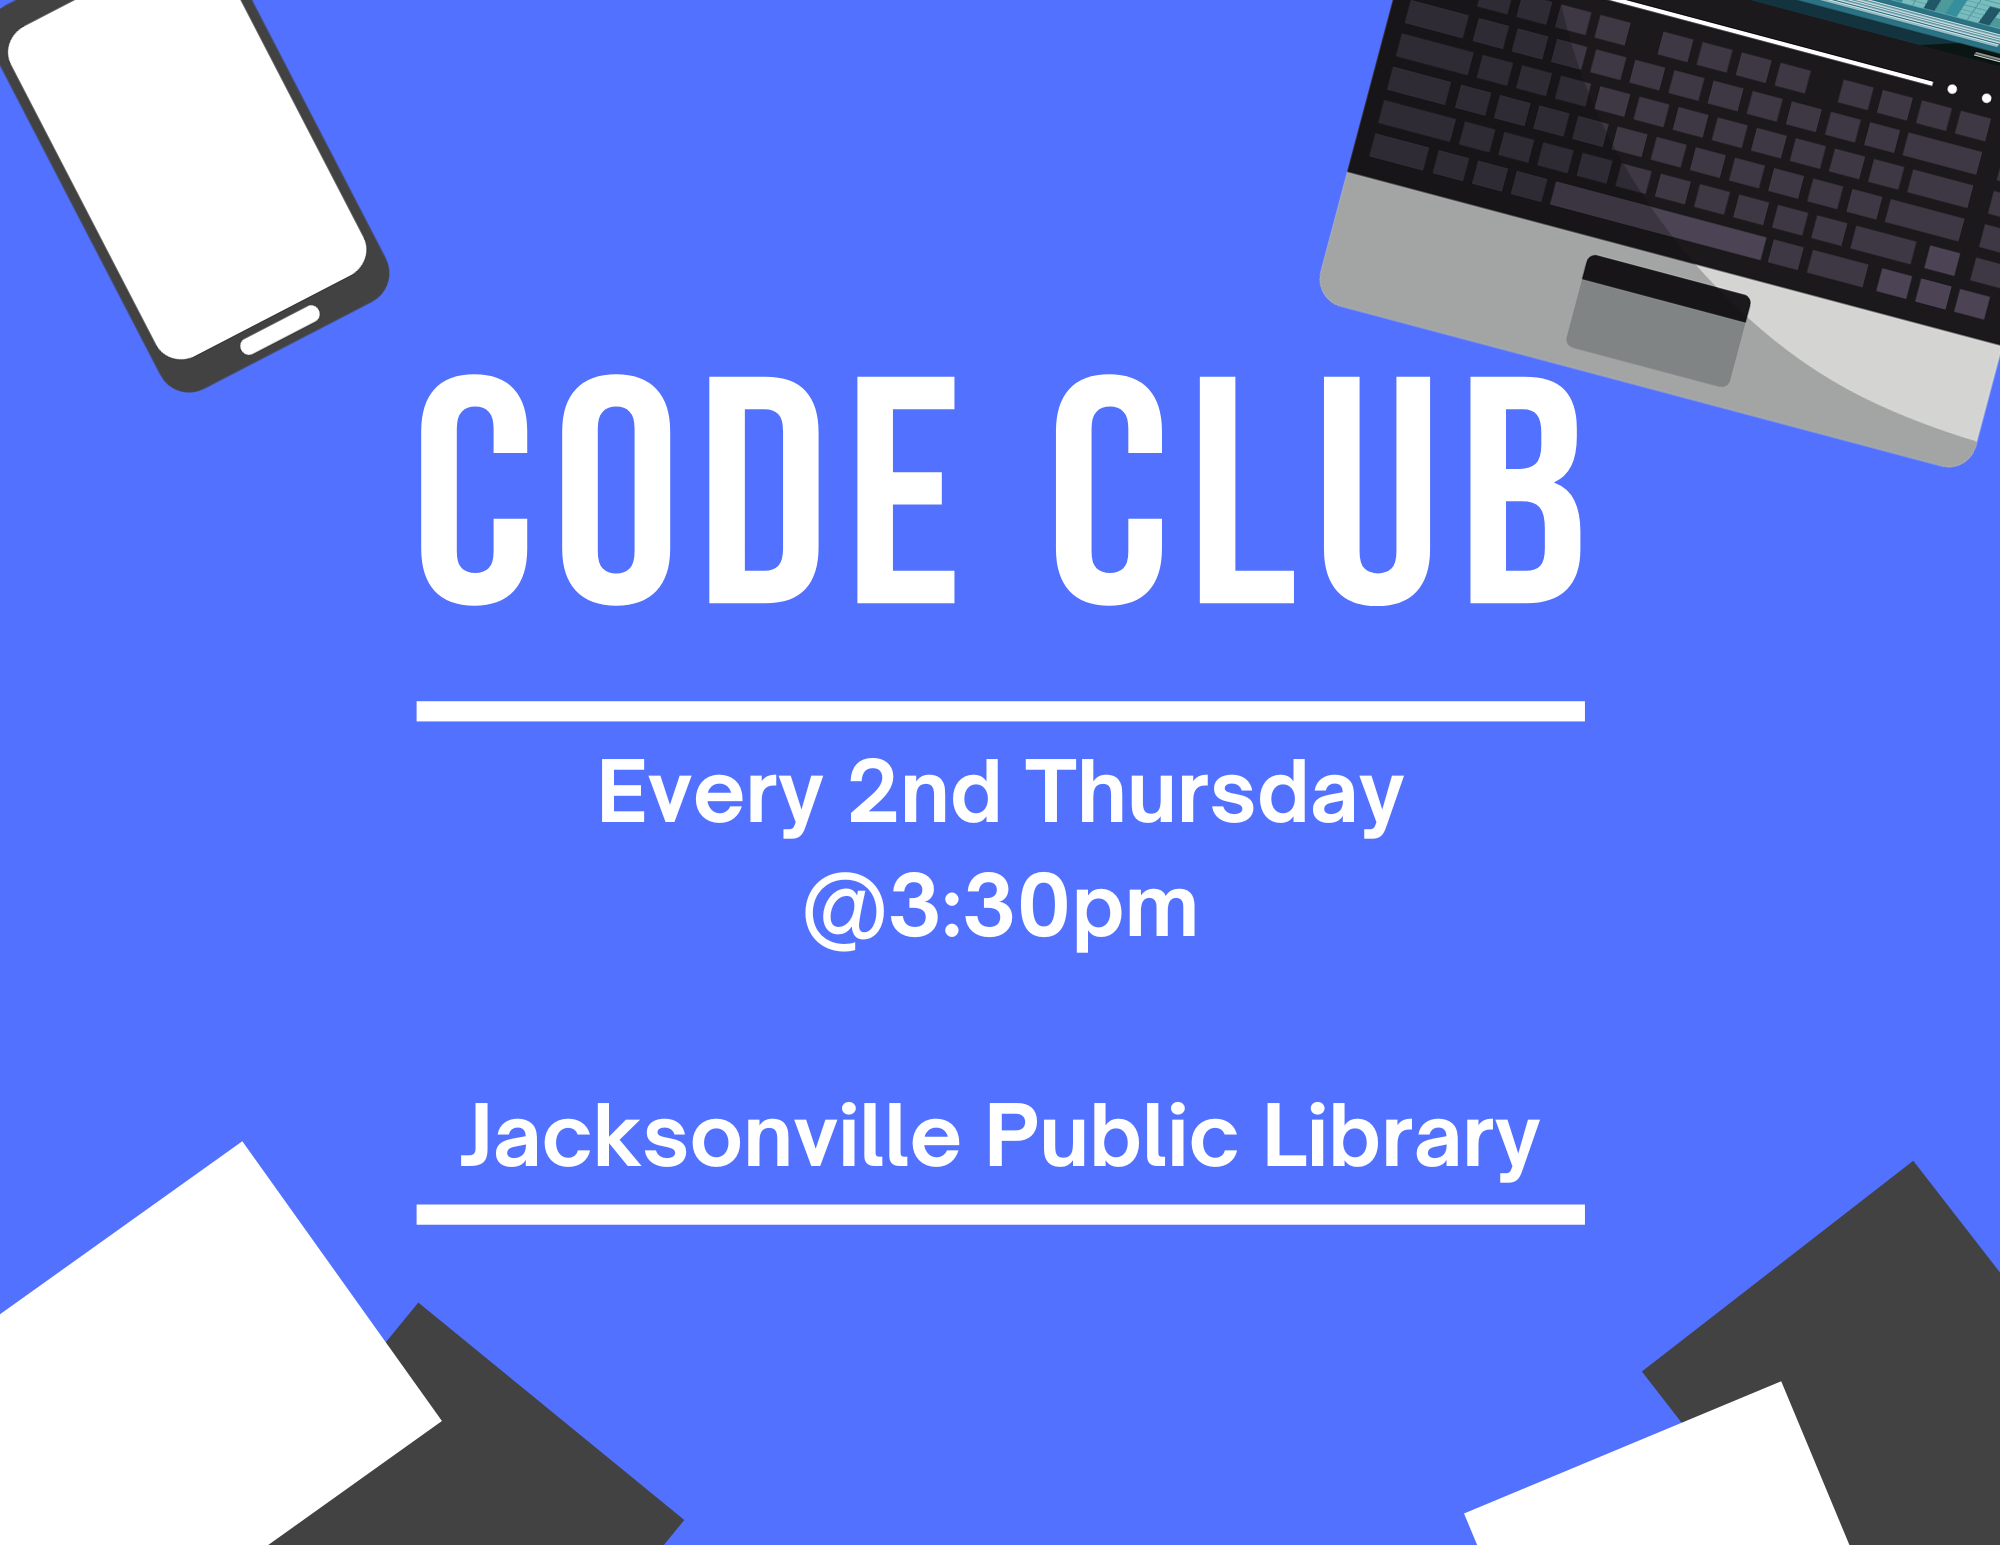 Come by every 2nd Thursday of the month to learn all about the wonders of coding your own video games, websites, and more! Ages 10+.